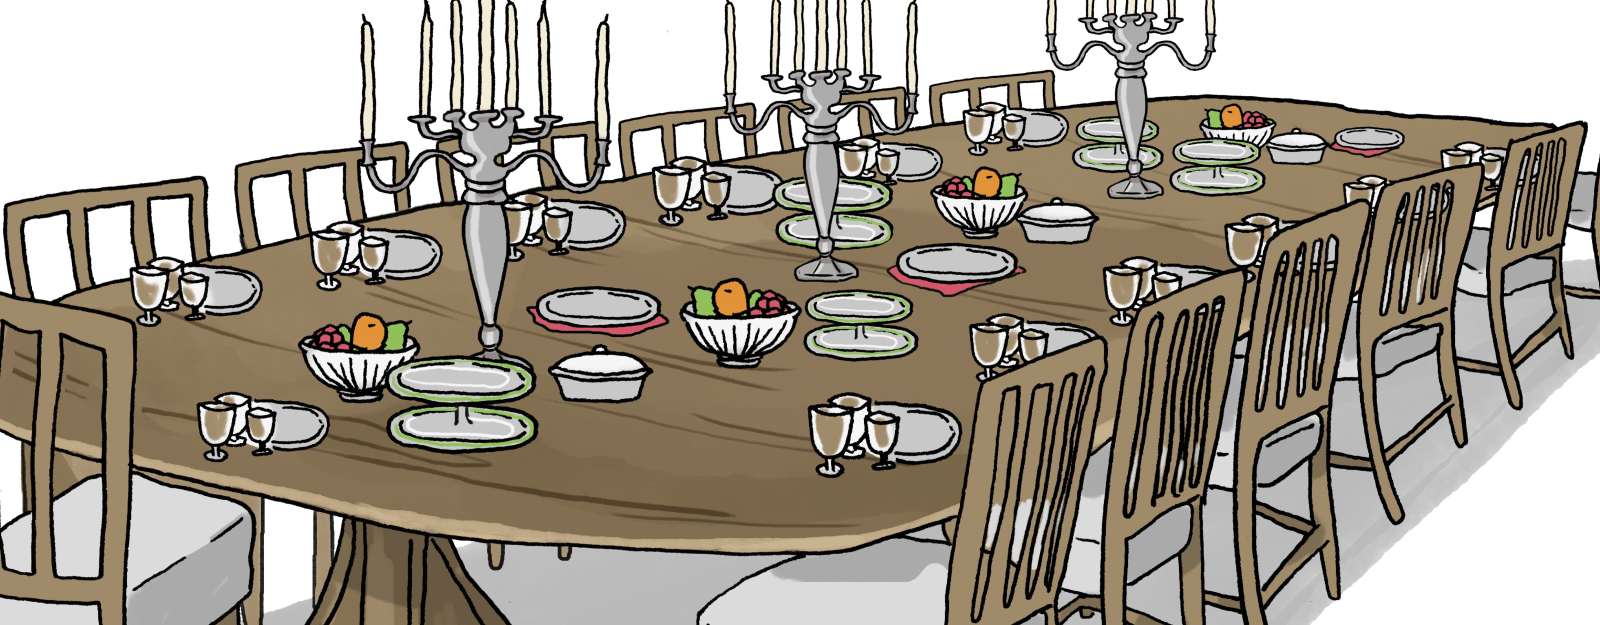 Illustration of dining table